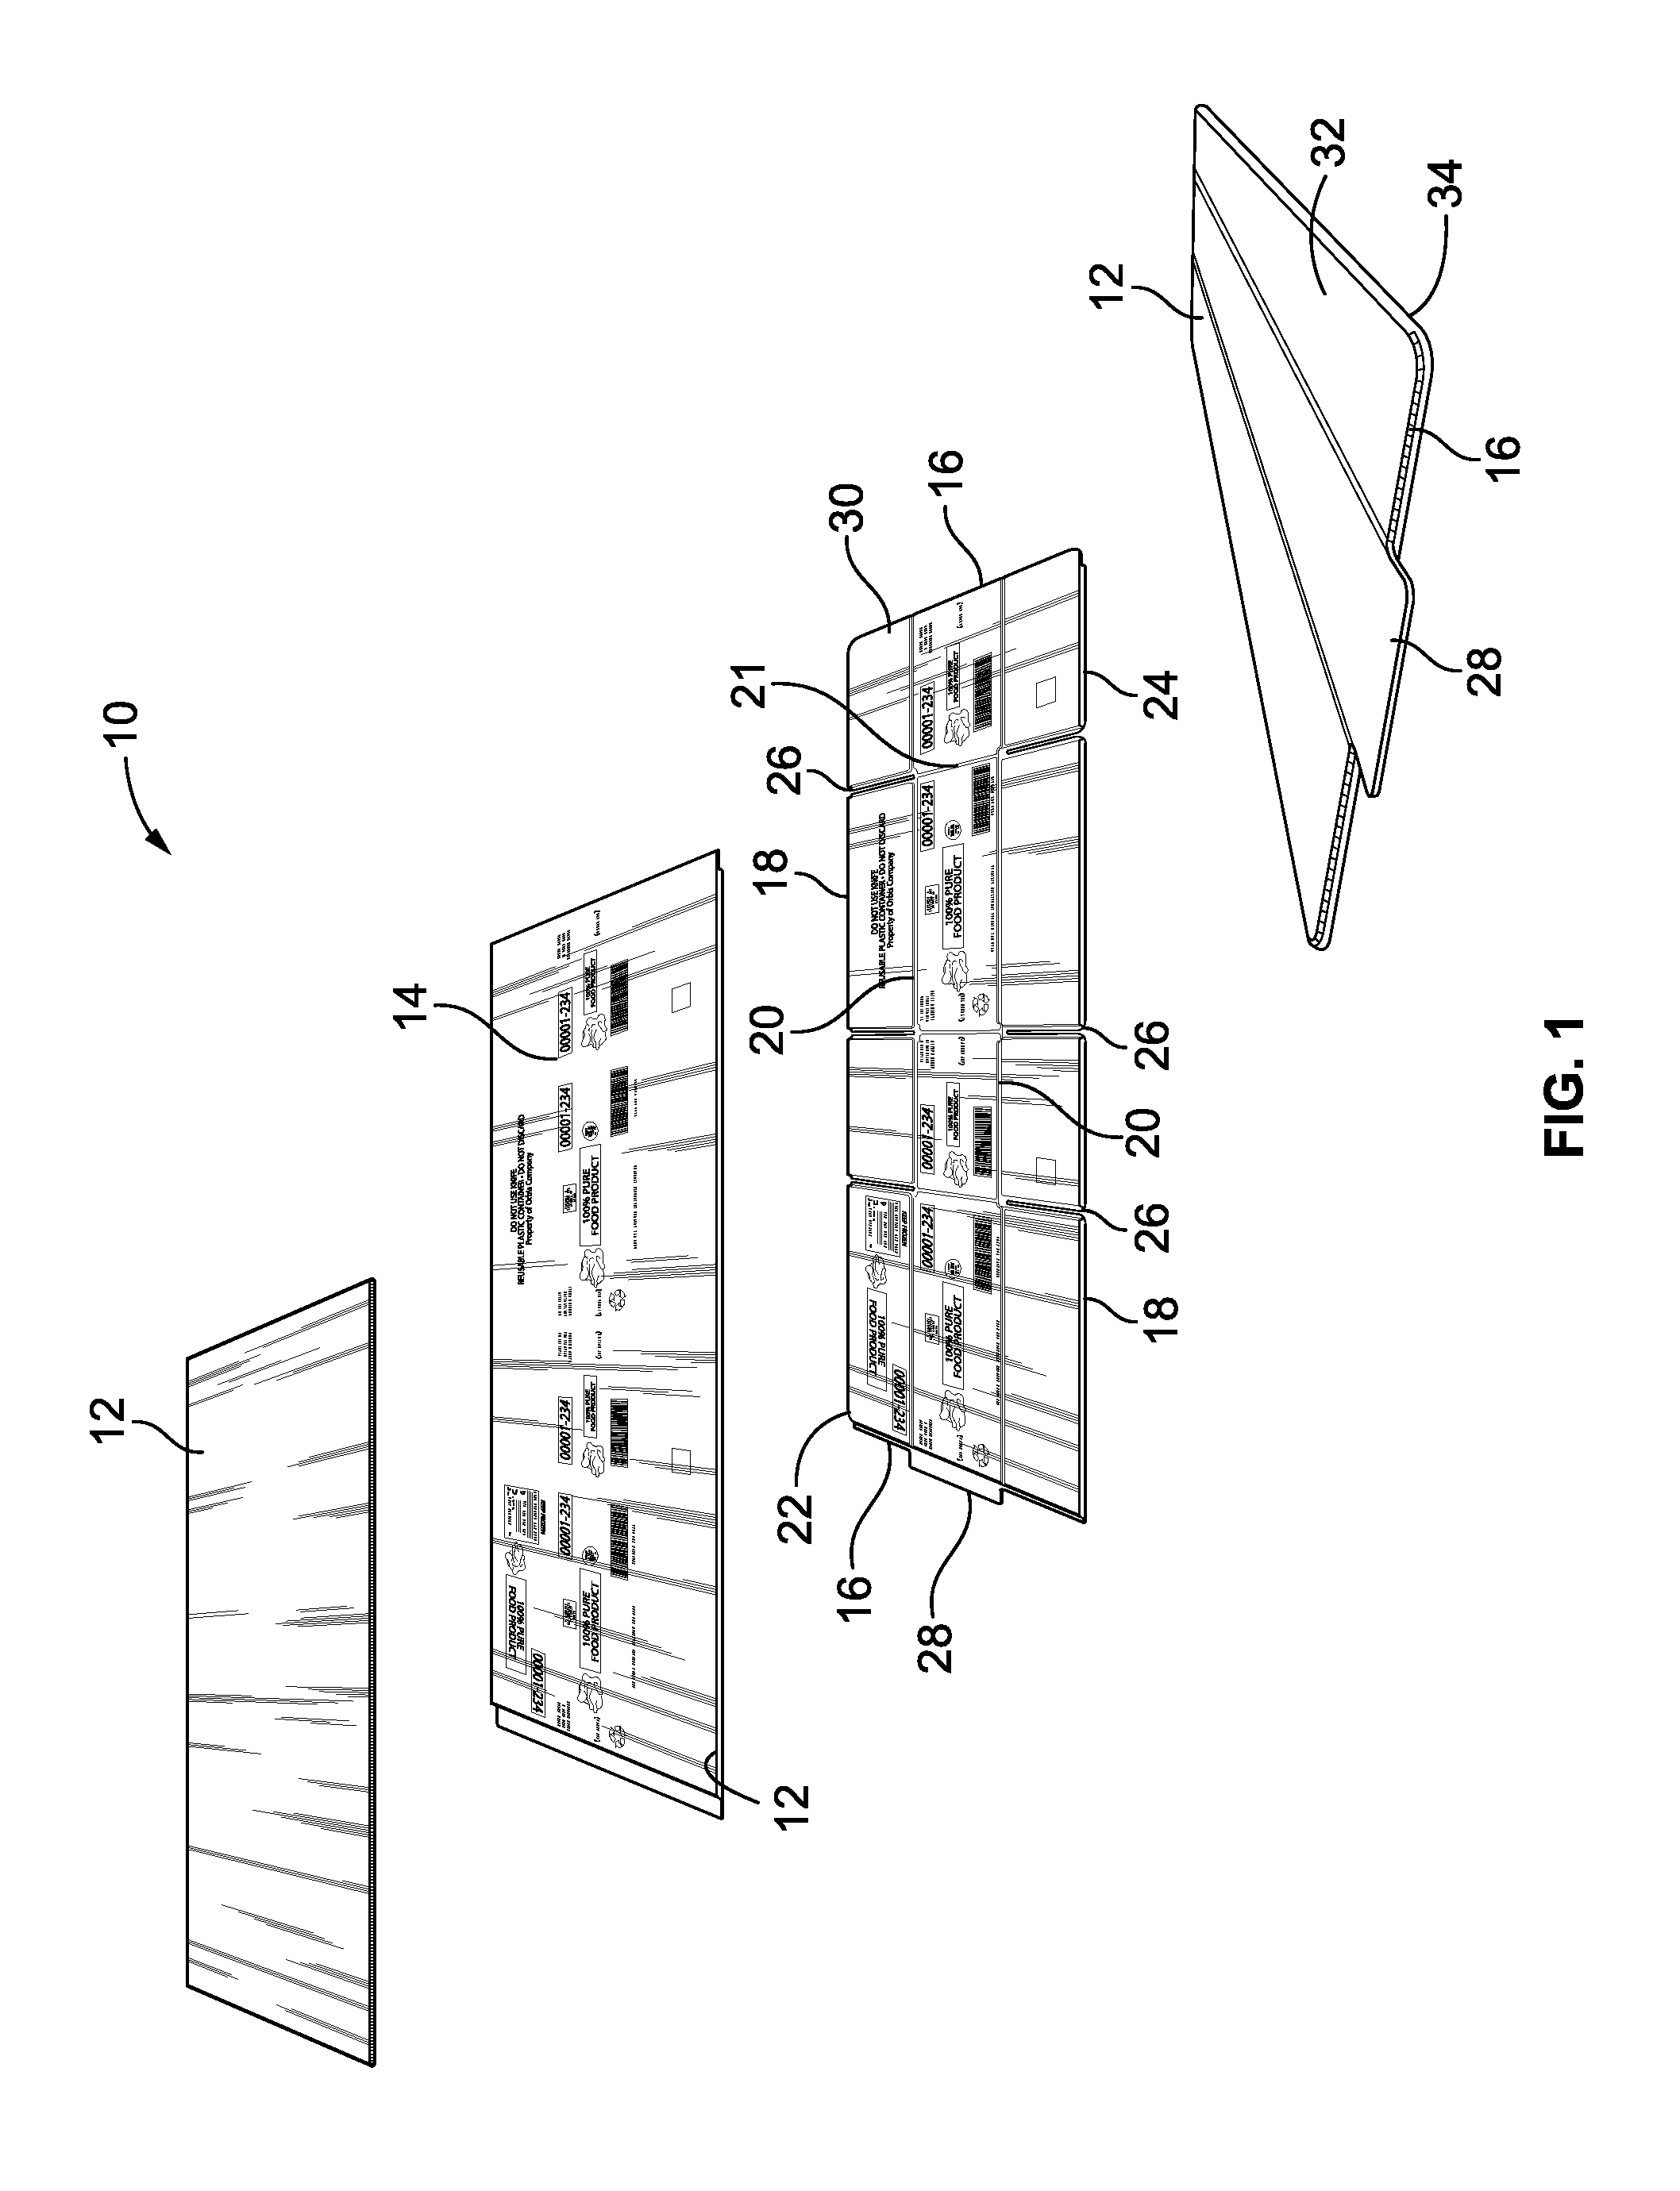 Process for Forming Plastic Corrugated Container and Intermediary Blank